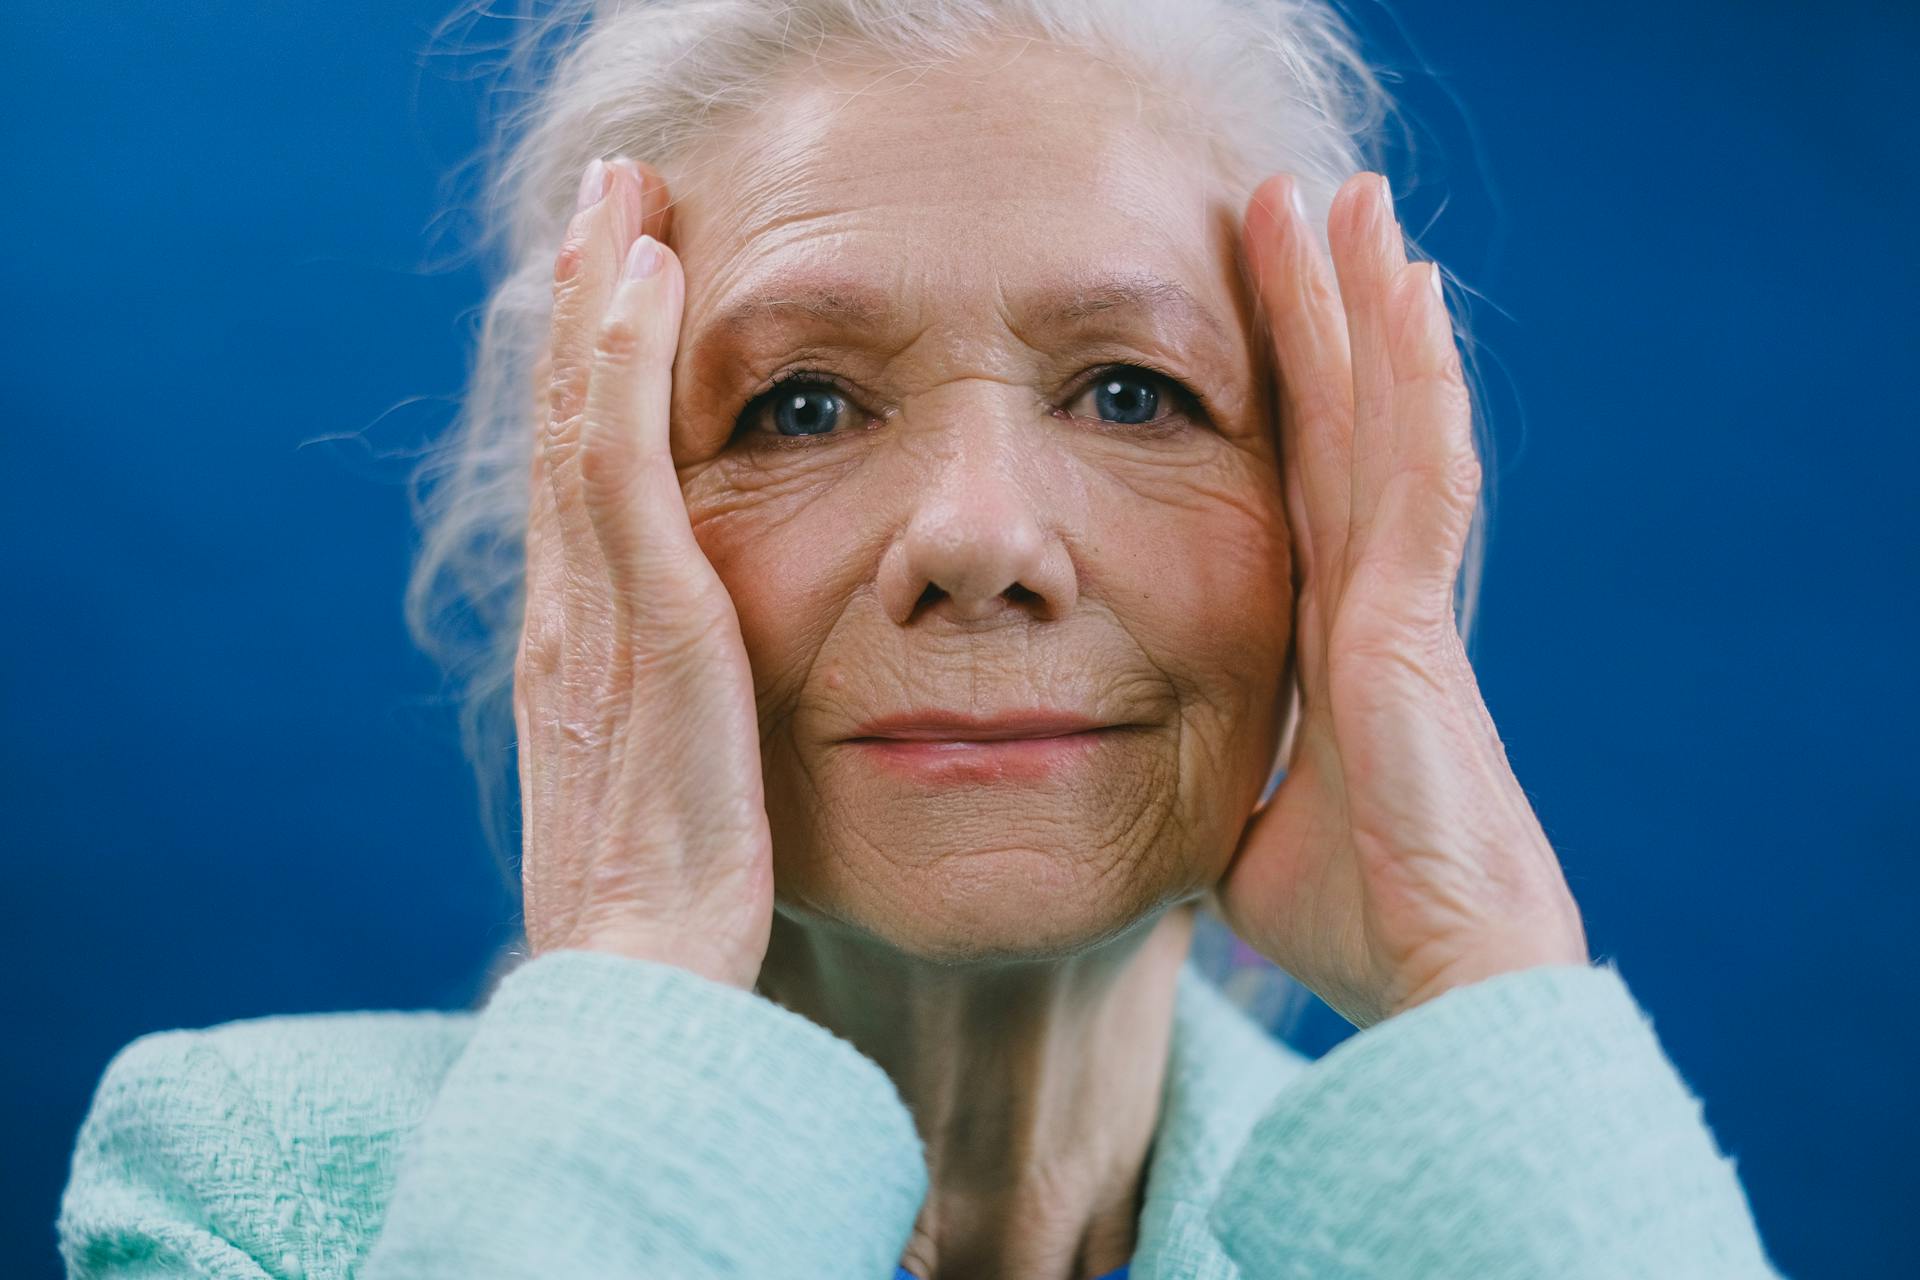 An elderly woman covering her face | Source: Pexels